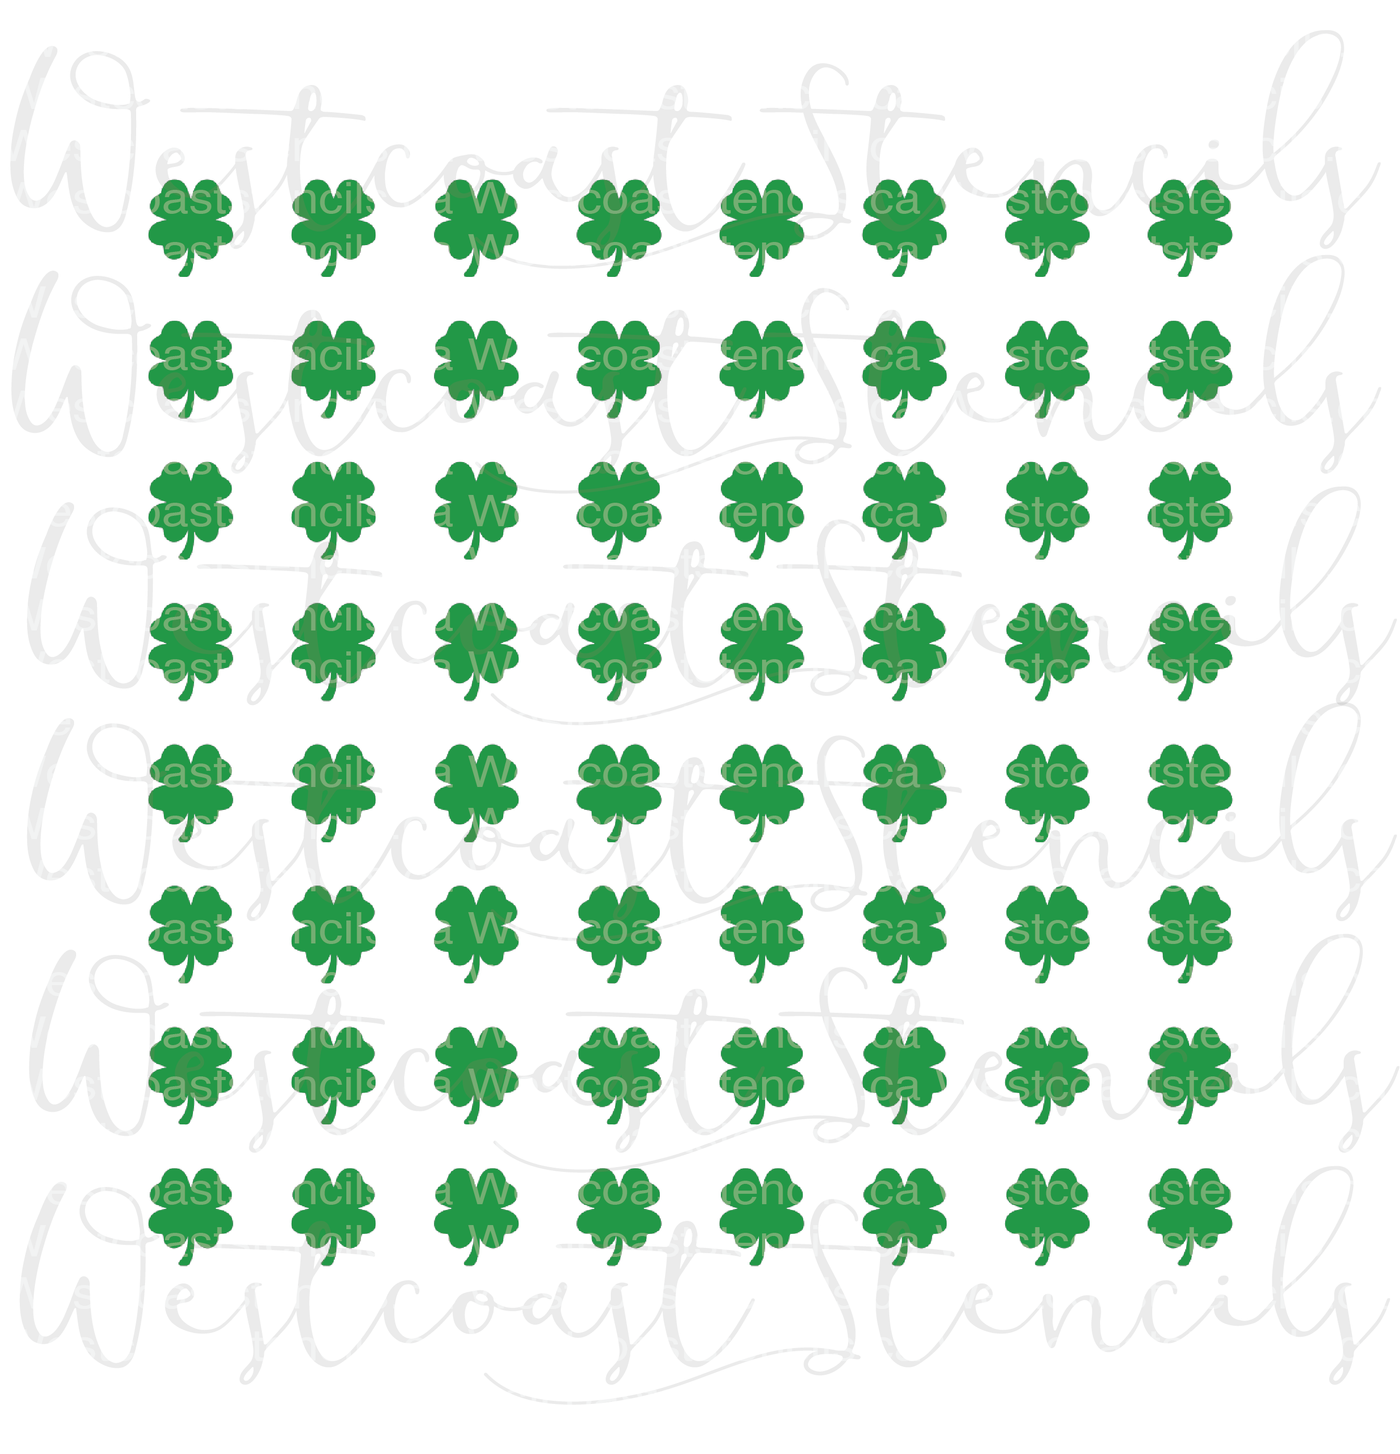 Small White Dots sprinkled on a Green background.